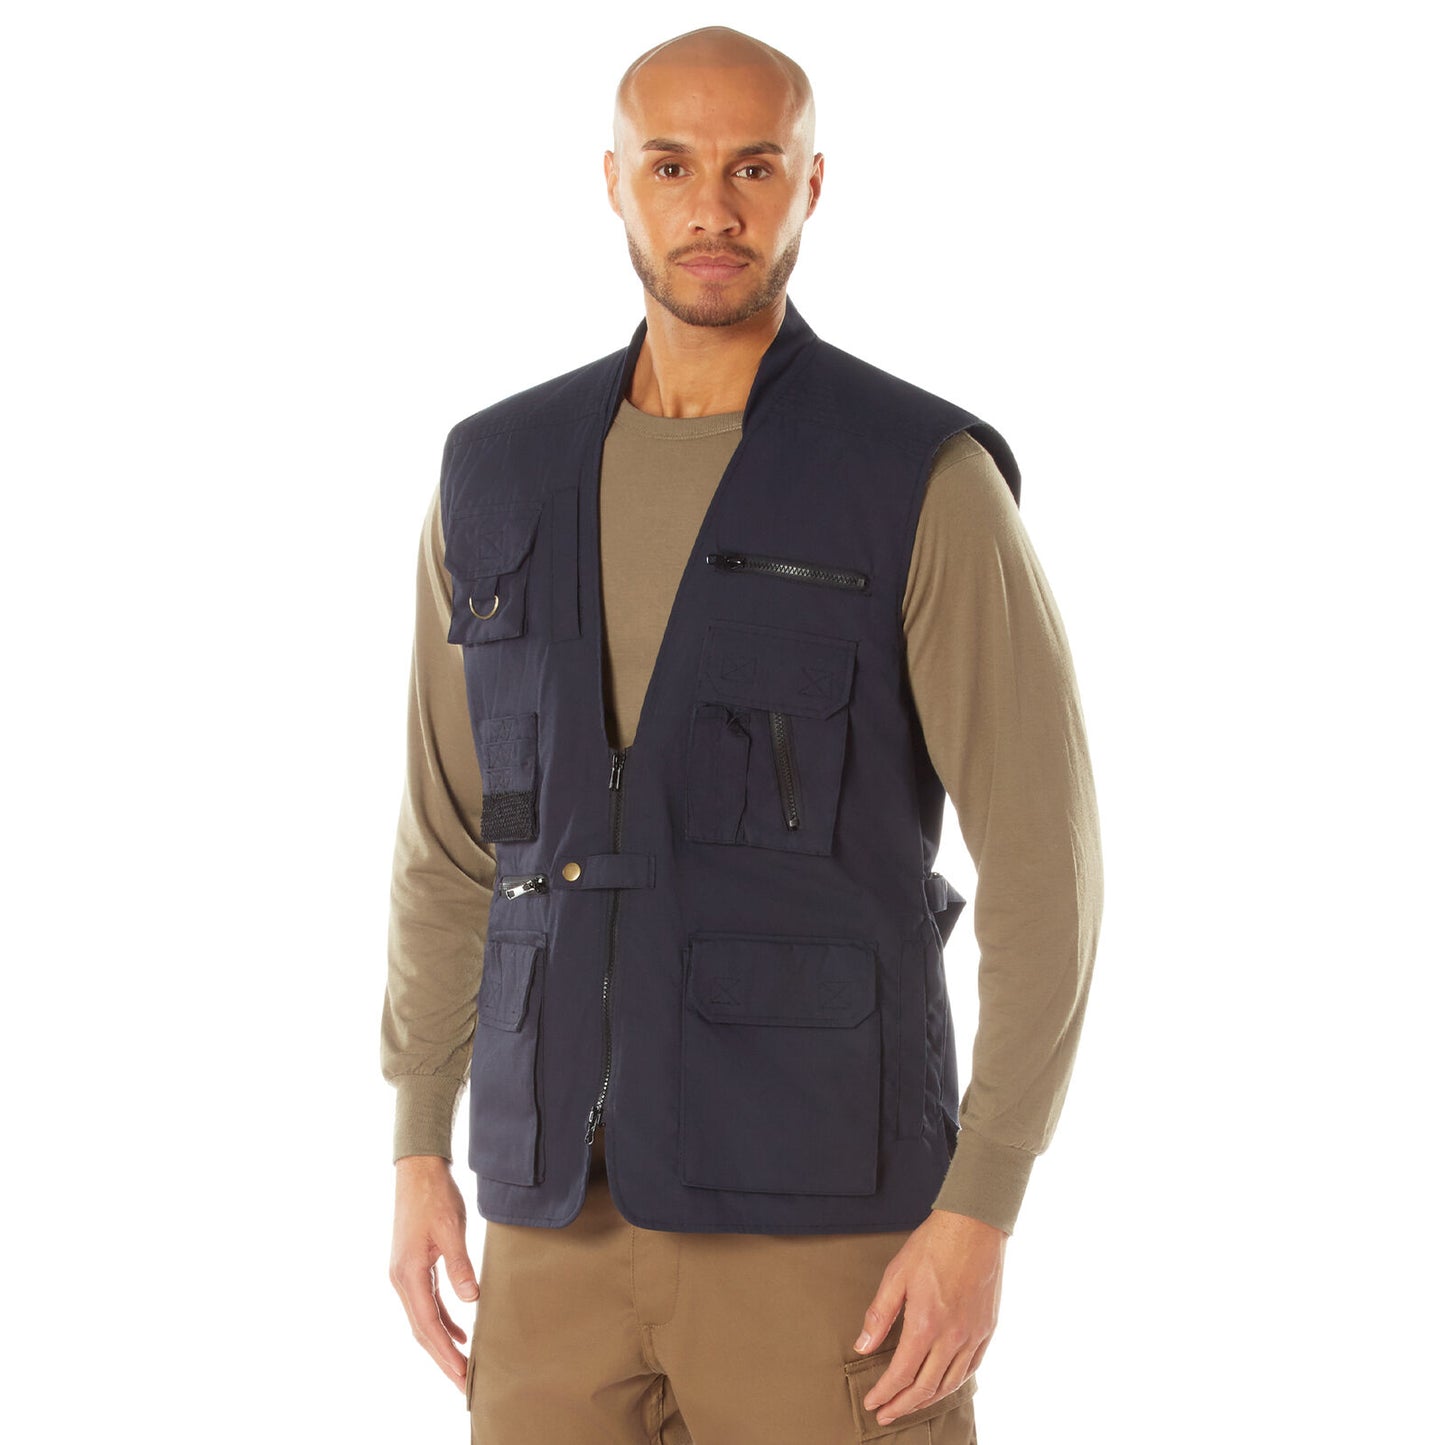 Men's Plainclothes Concealed Carry Vest in Midnight Navy Blue